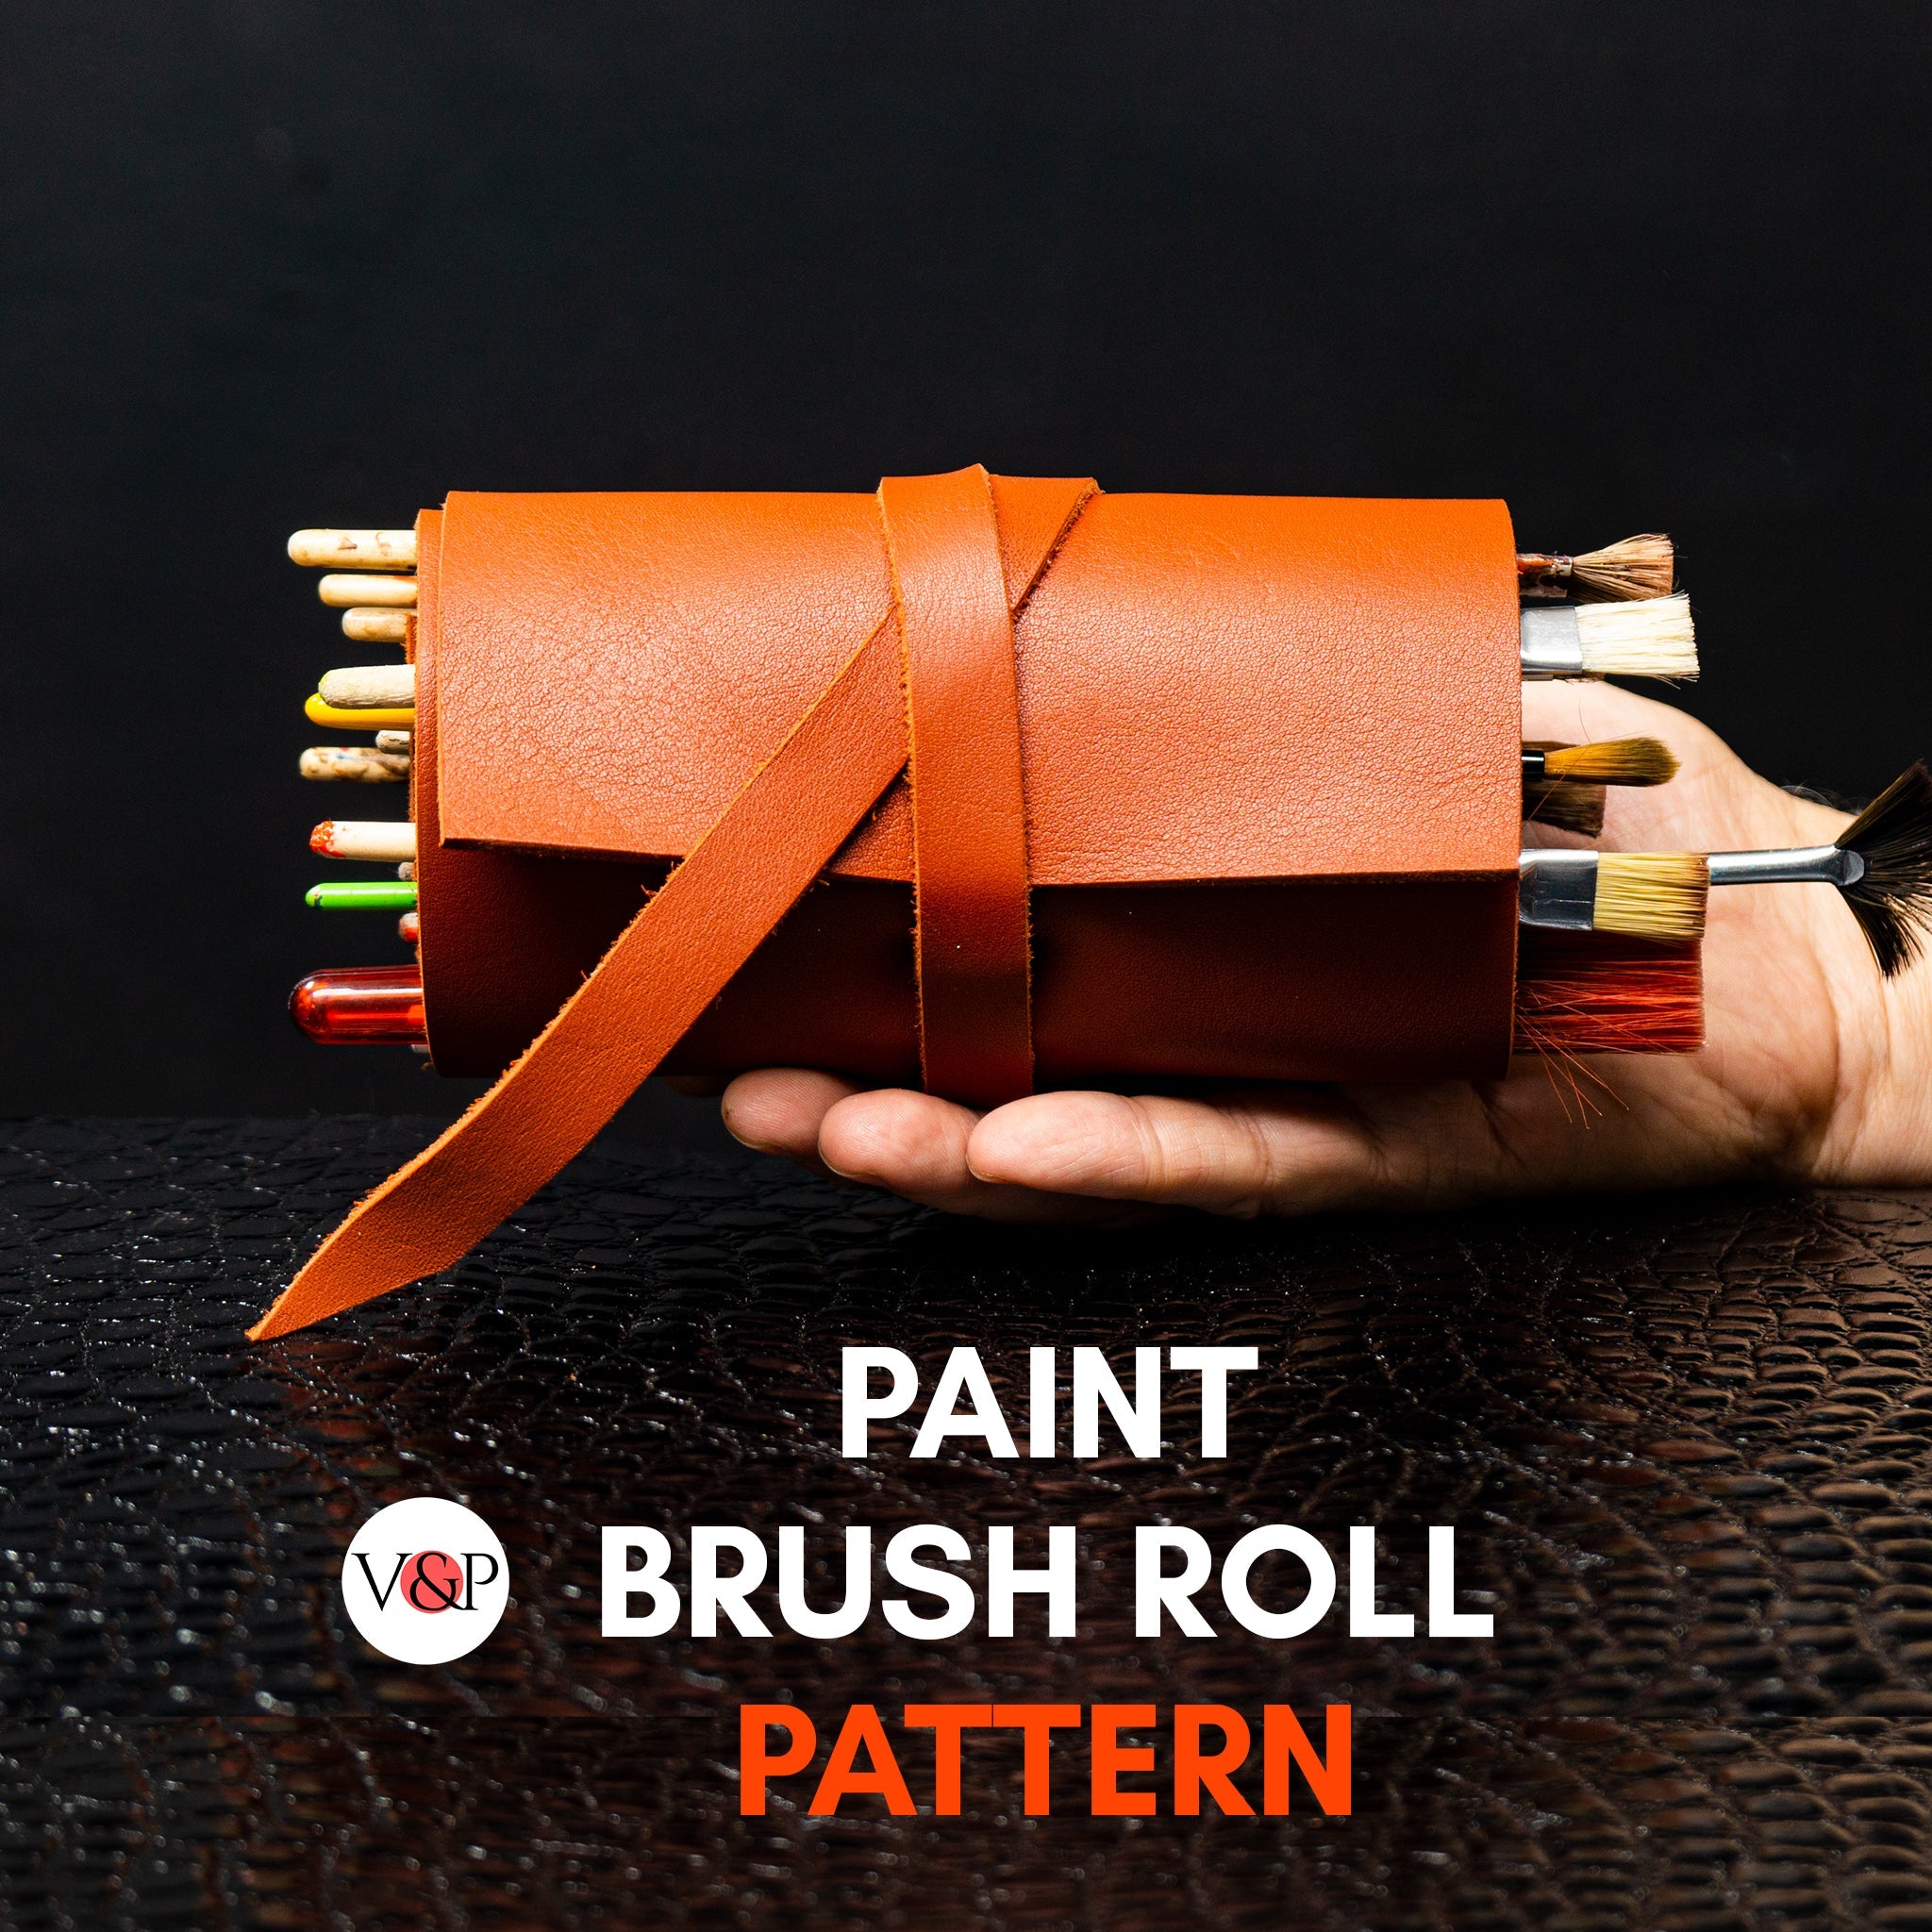 Paint Brush Roll, PDF Pattern And Instructional Video by Vasile and Pavel - Vasile and Pavel Leather Patterns